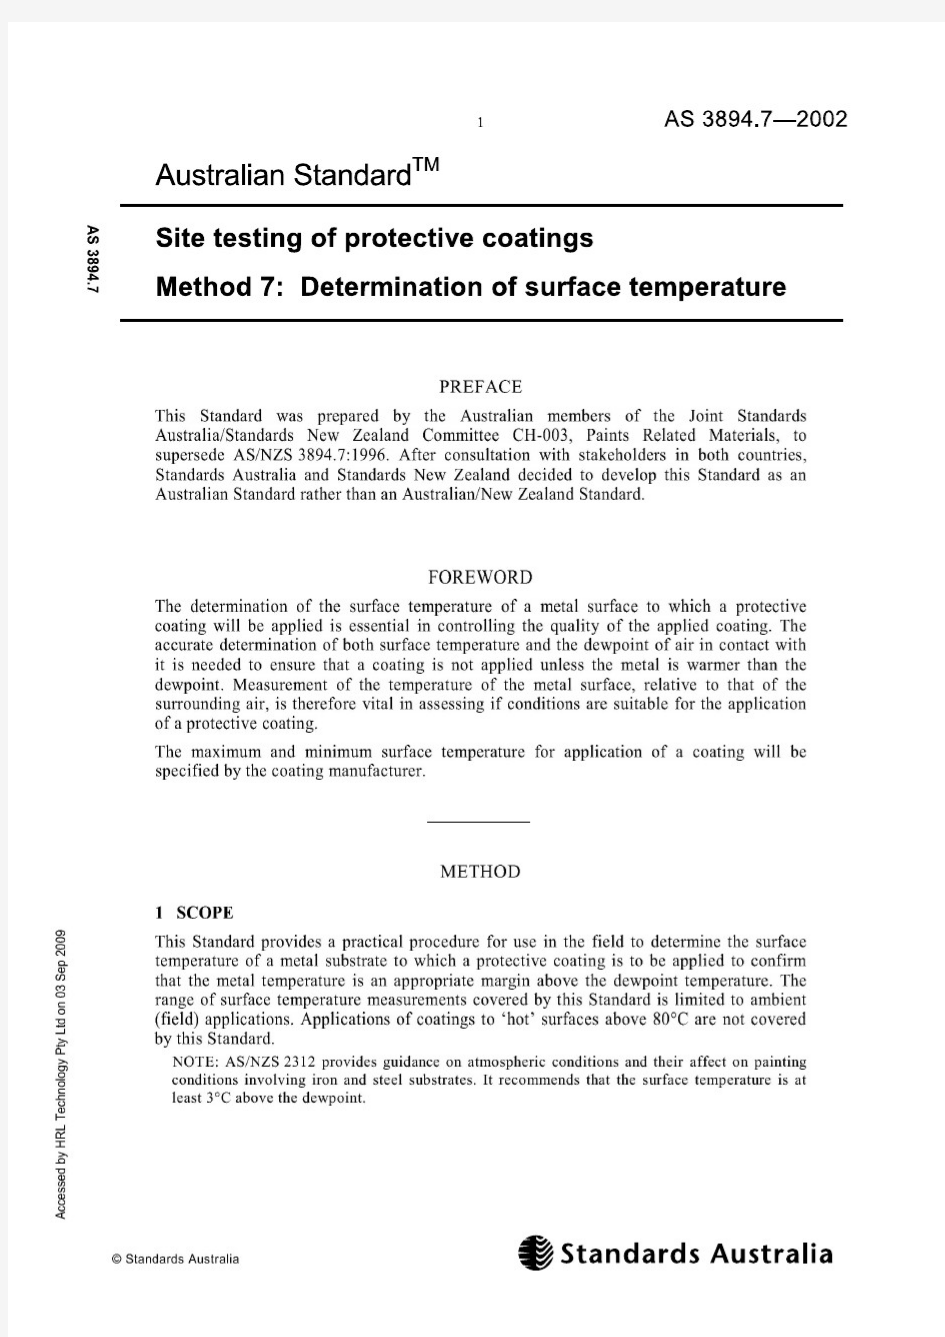 AS 3894.7-2002 Site testing of protective coatings - Determination of surface temperature